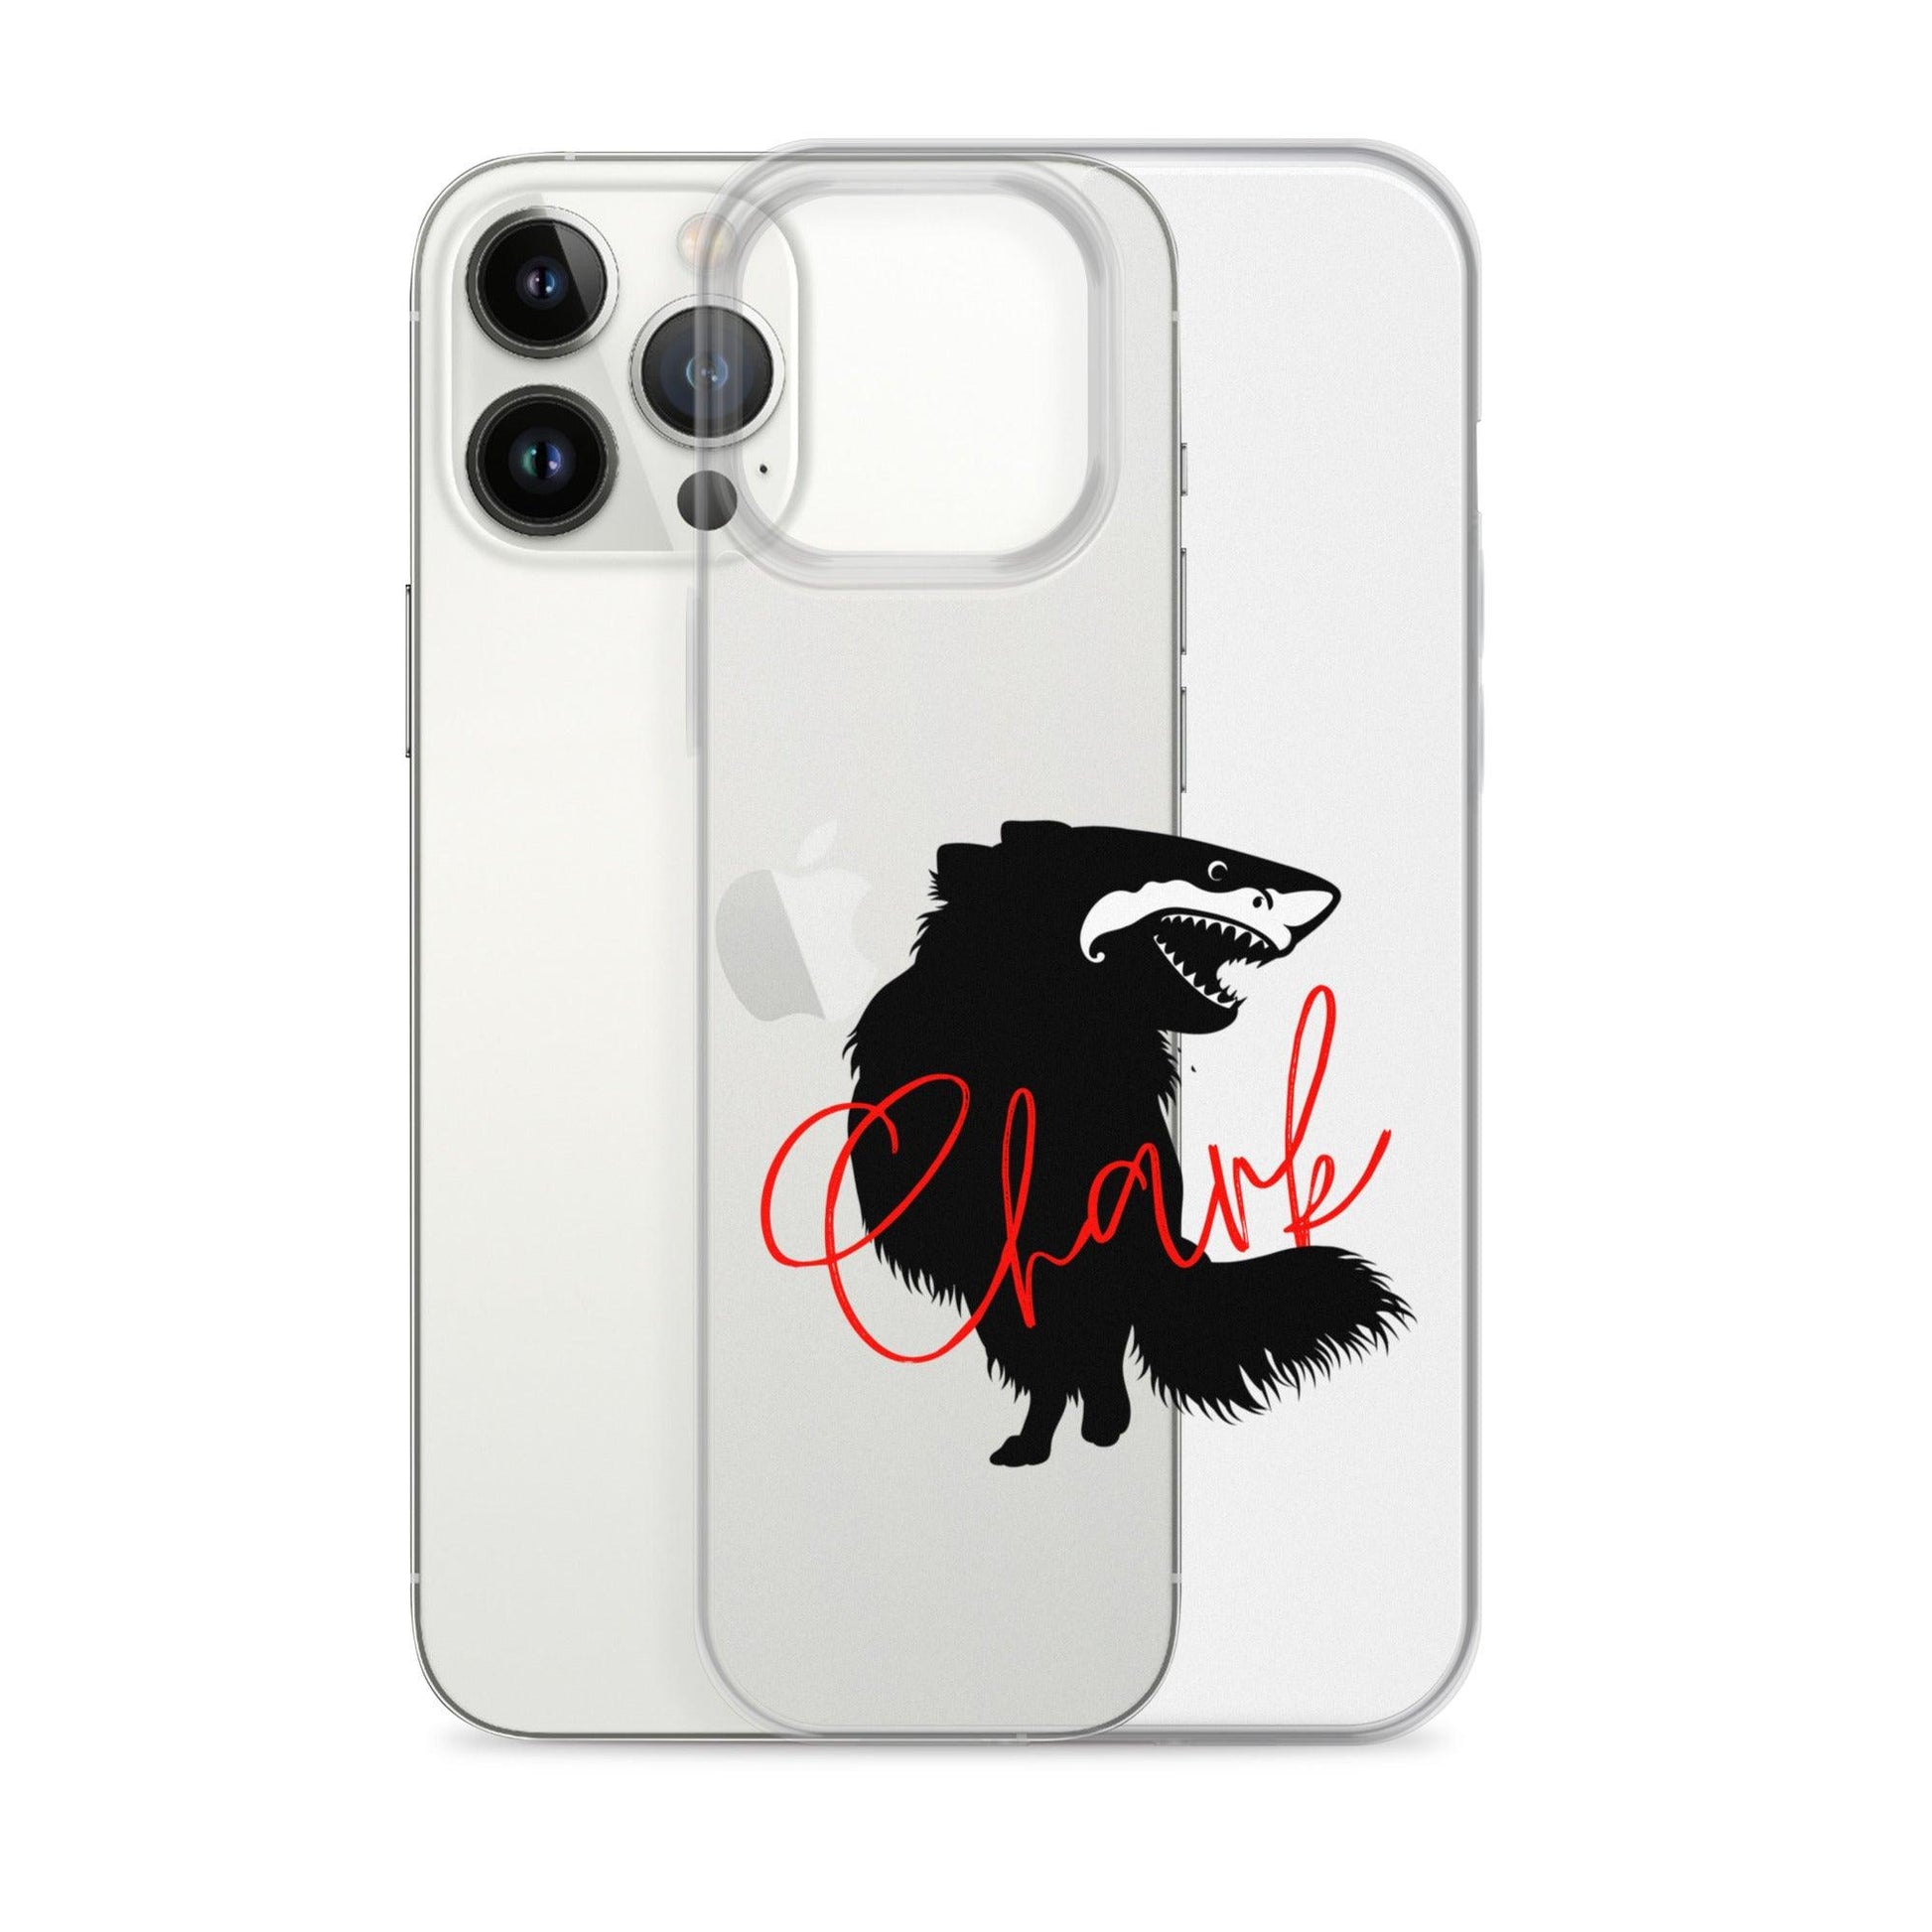 Chihuahua + Shark = Chark Clear iPhone case with the black silhouette of a longhaired chihuahua with the face of a great white shark - mouth open to show off jaws lined with lots of sharp white teeth. The word "Chark" is artfully placed in red cursive font over the image. For trendy chi lovers. iPhone 13 pro max case.